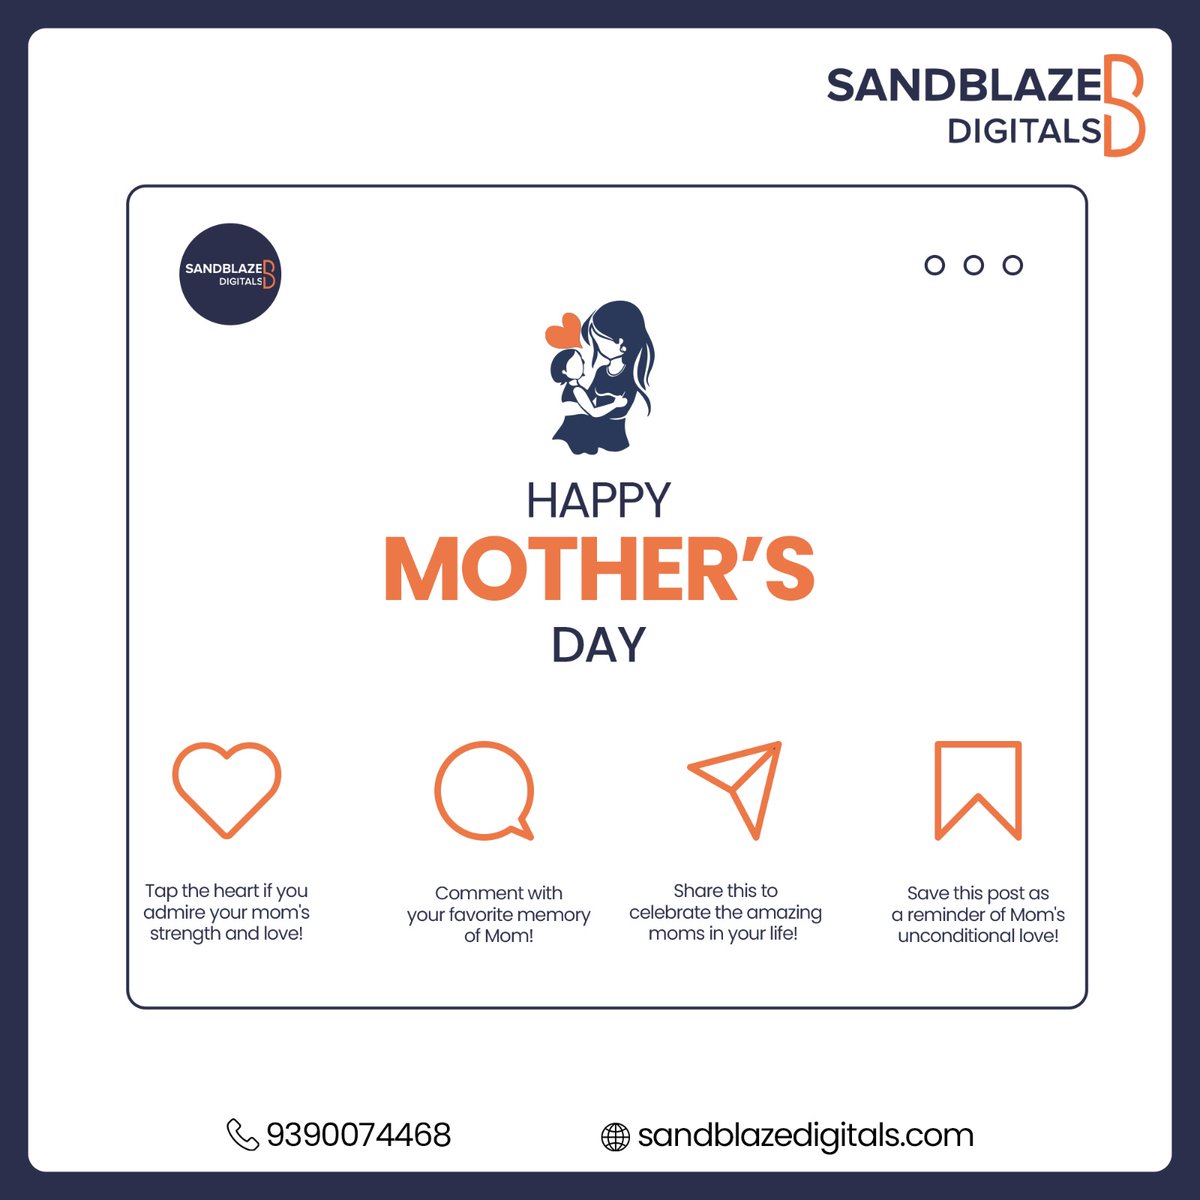 Let's make every heart click in appreciation, every comment a story of love, and every share a tribute to mothers everywhere. Happy Mother’s Day from Sandblaze Digitals! 🧡💬 

For More Information:
Contact us @+91 91216 78789
Visit us @ sandblazedigitals.com

#HappyMothersday